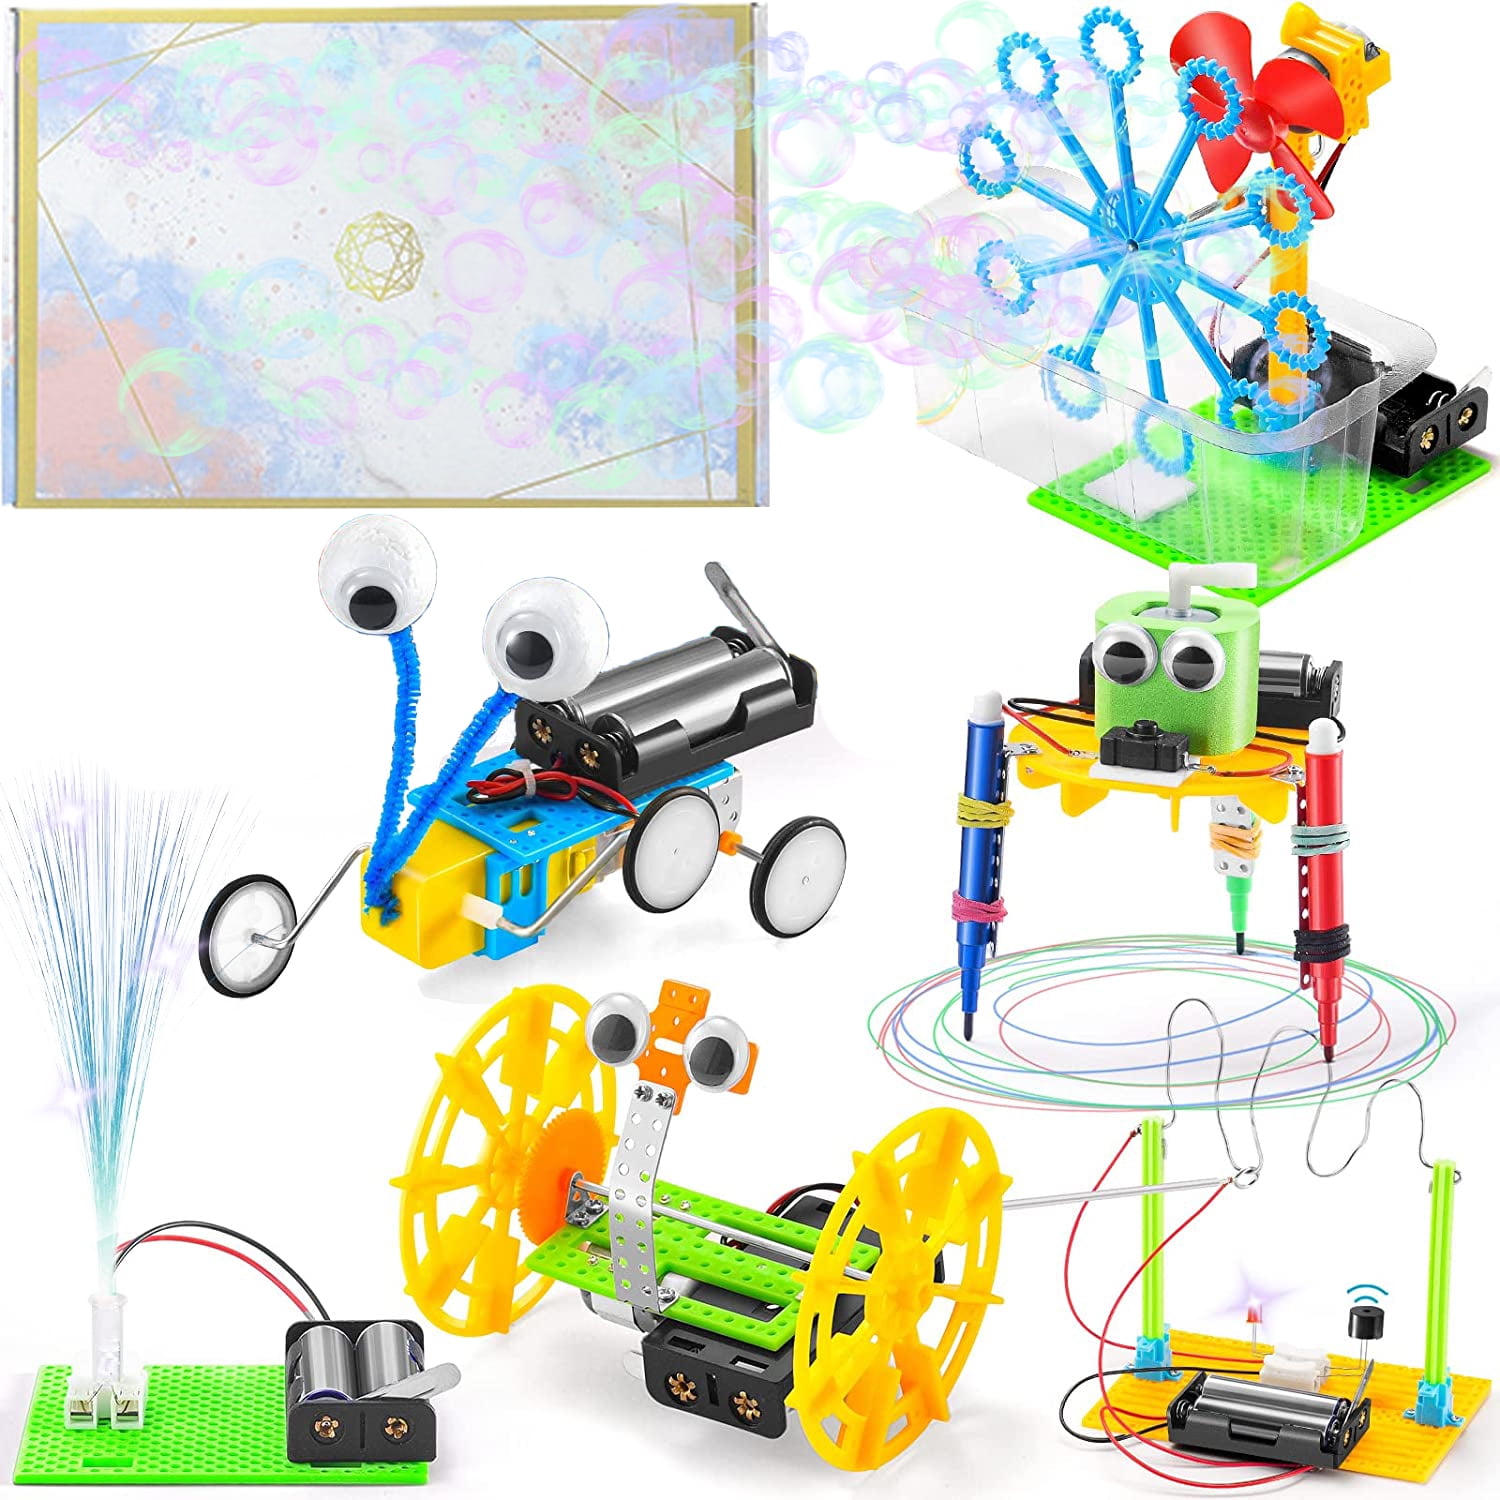  STEM Robotics Science Kits, Projects Robot Building Kit For  Kids Ages 8-12, Electronic Experiments Build Activities Engineering Toys,  DIY Gifts Craft For Boys Girls 8-10 7+ 6 7 8 9 10 11 12 + Year Old